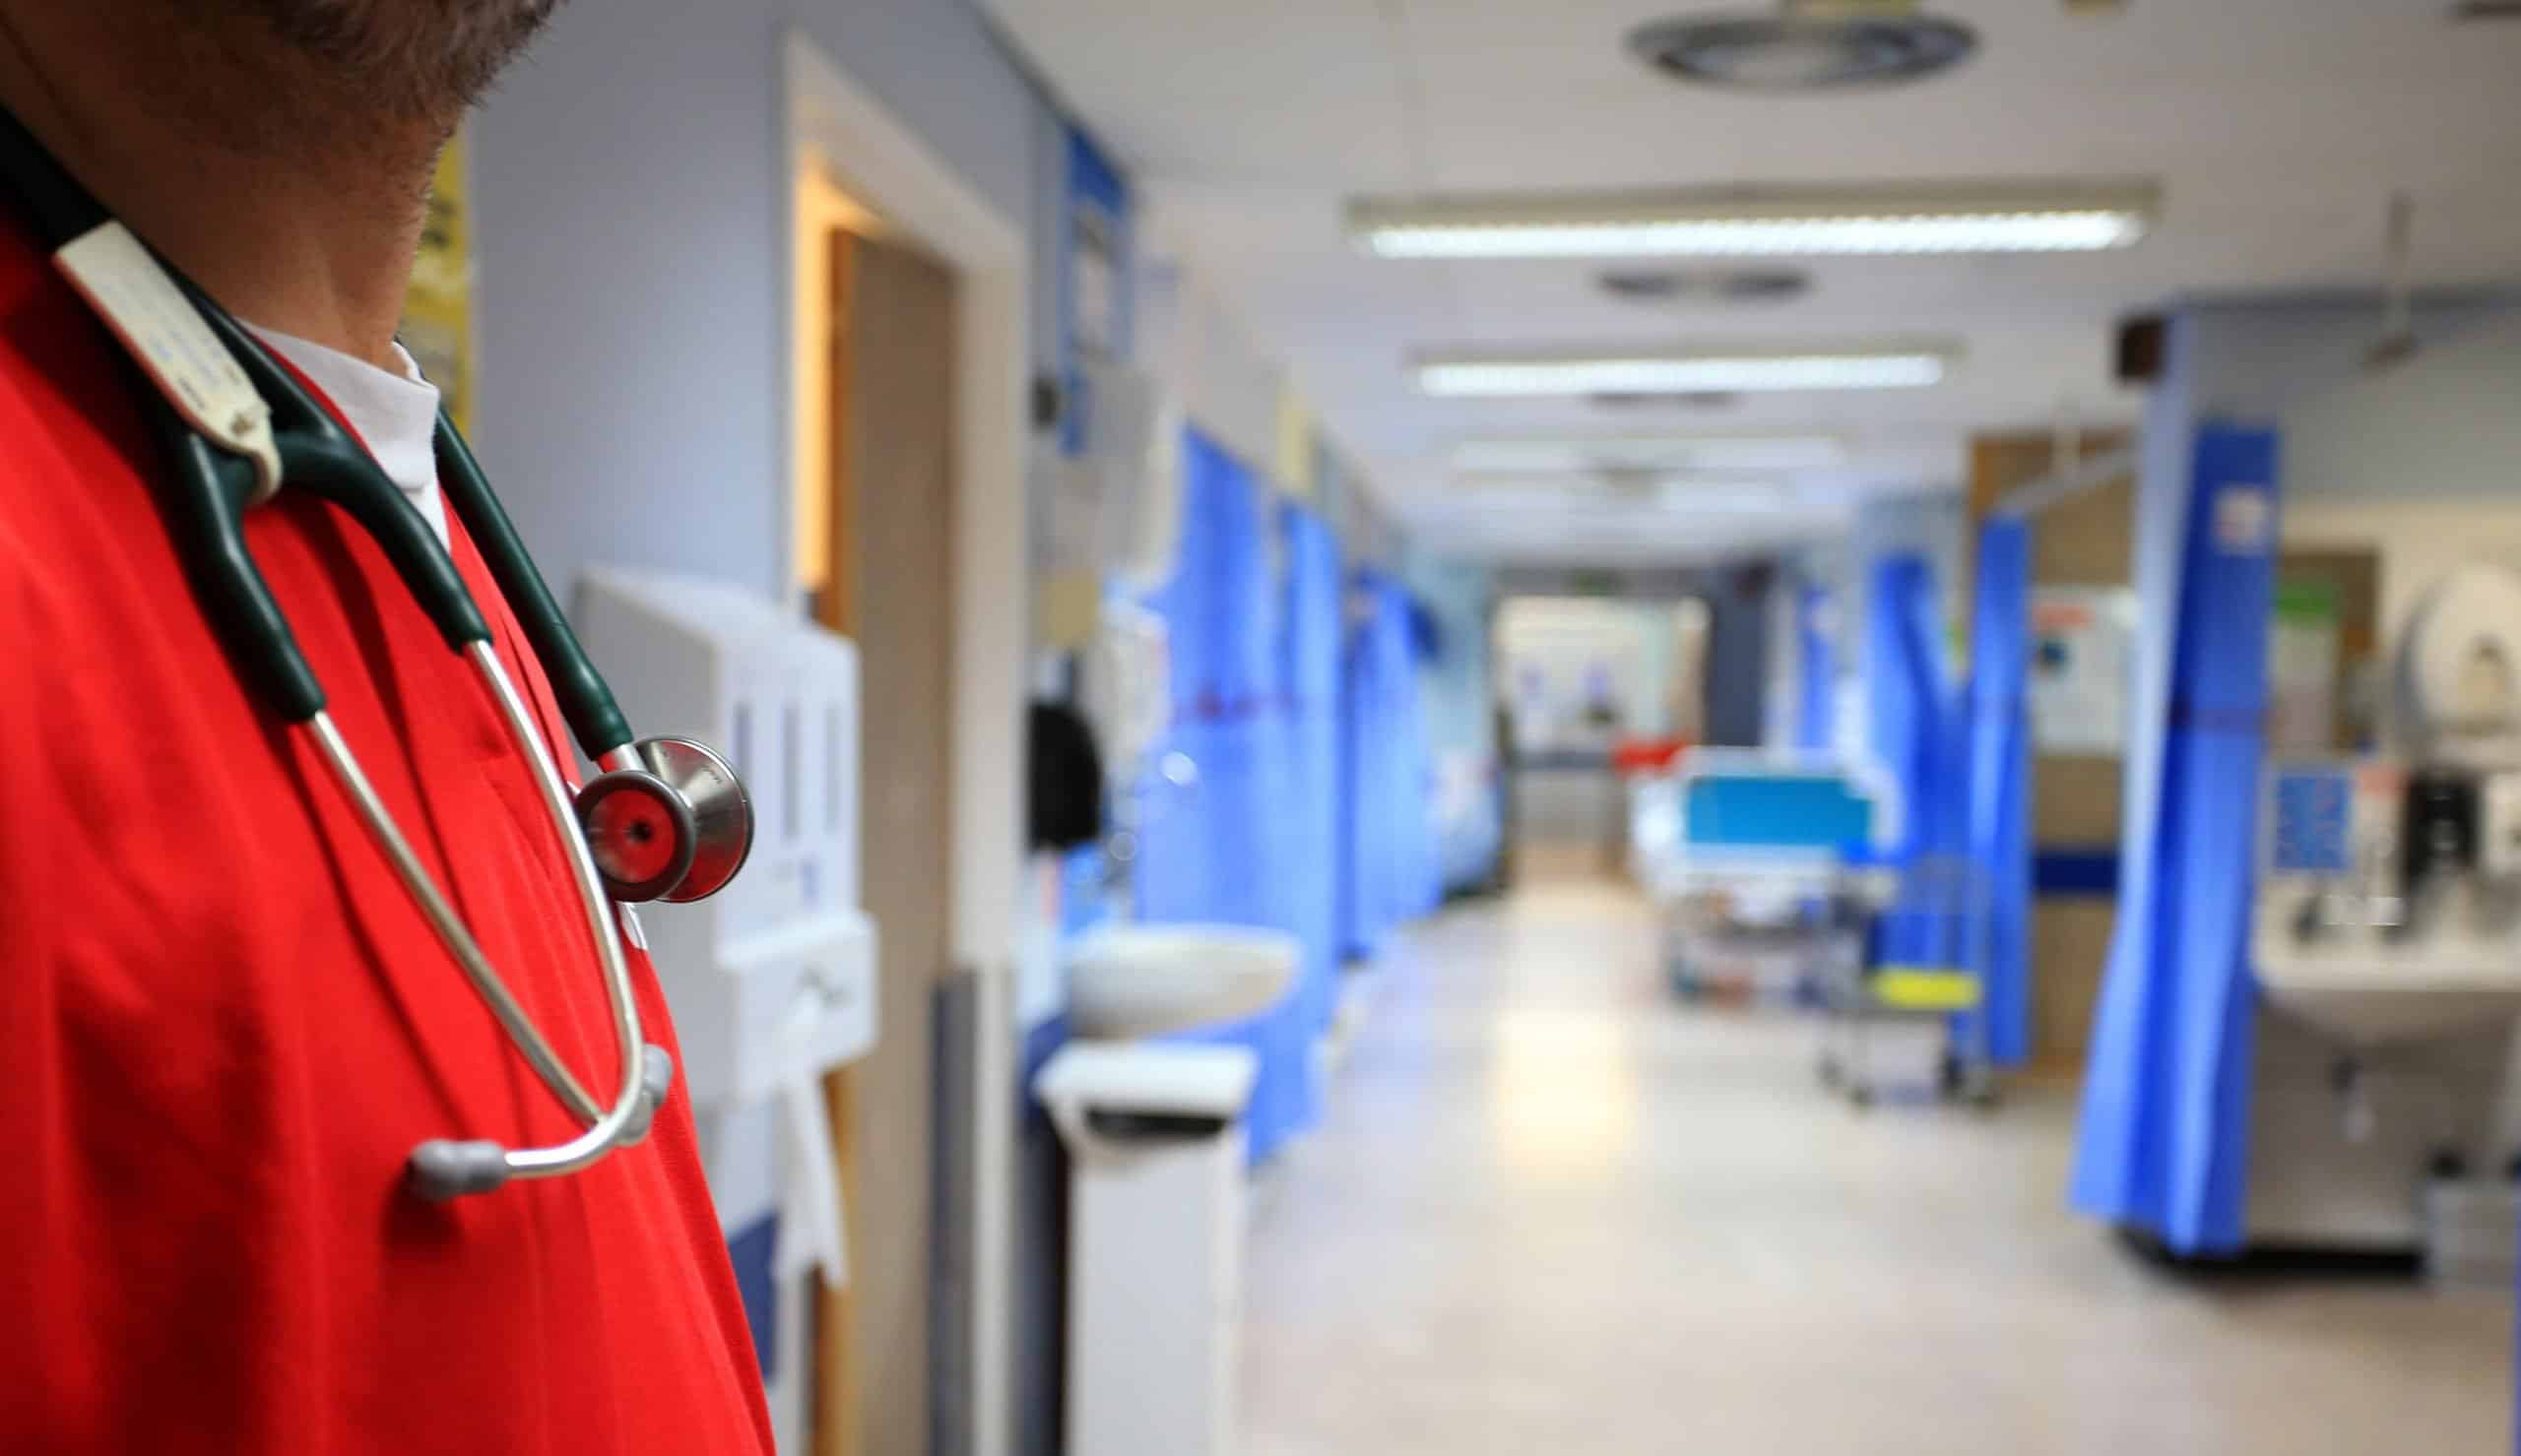 NHS understaffing ‘serious risk to patient safety’ as number of workers needed revealed